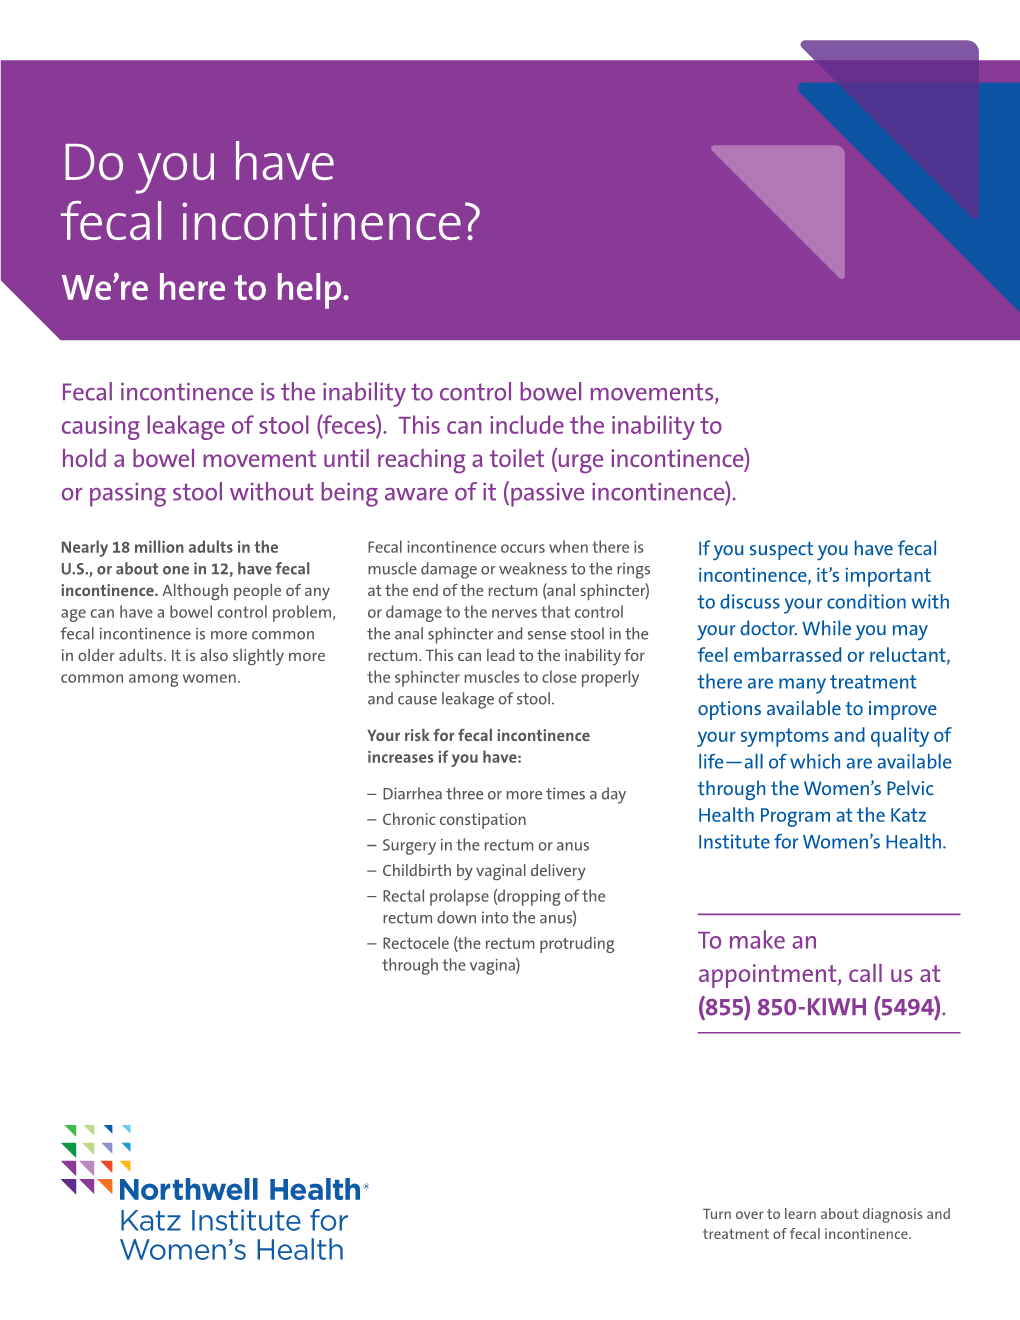 Do You Have Fecal Incontinence?